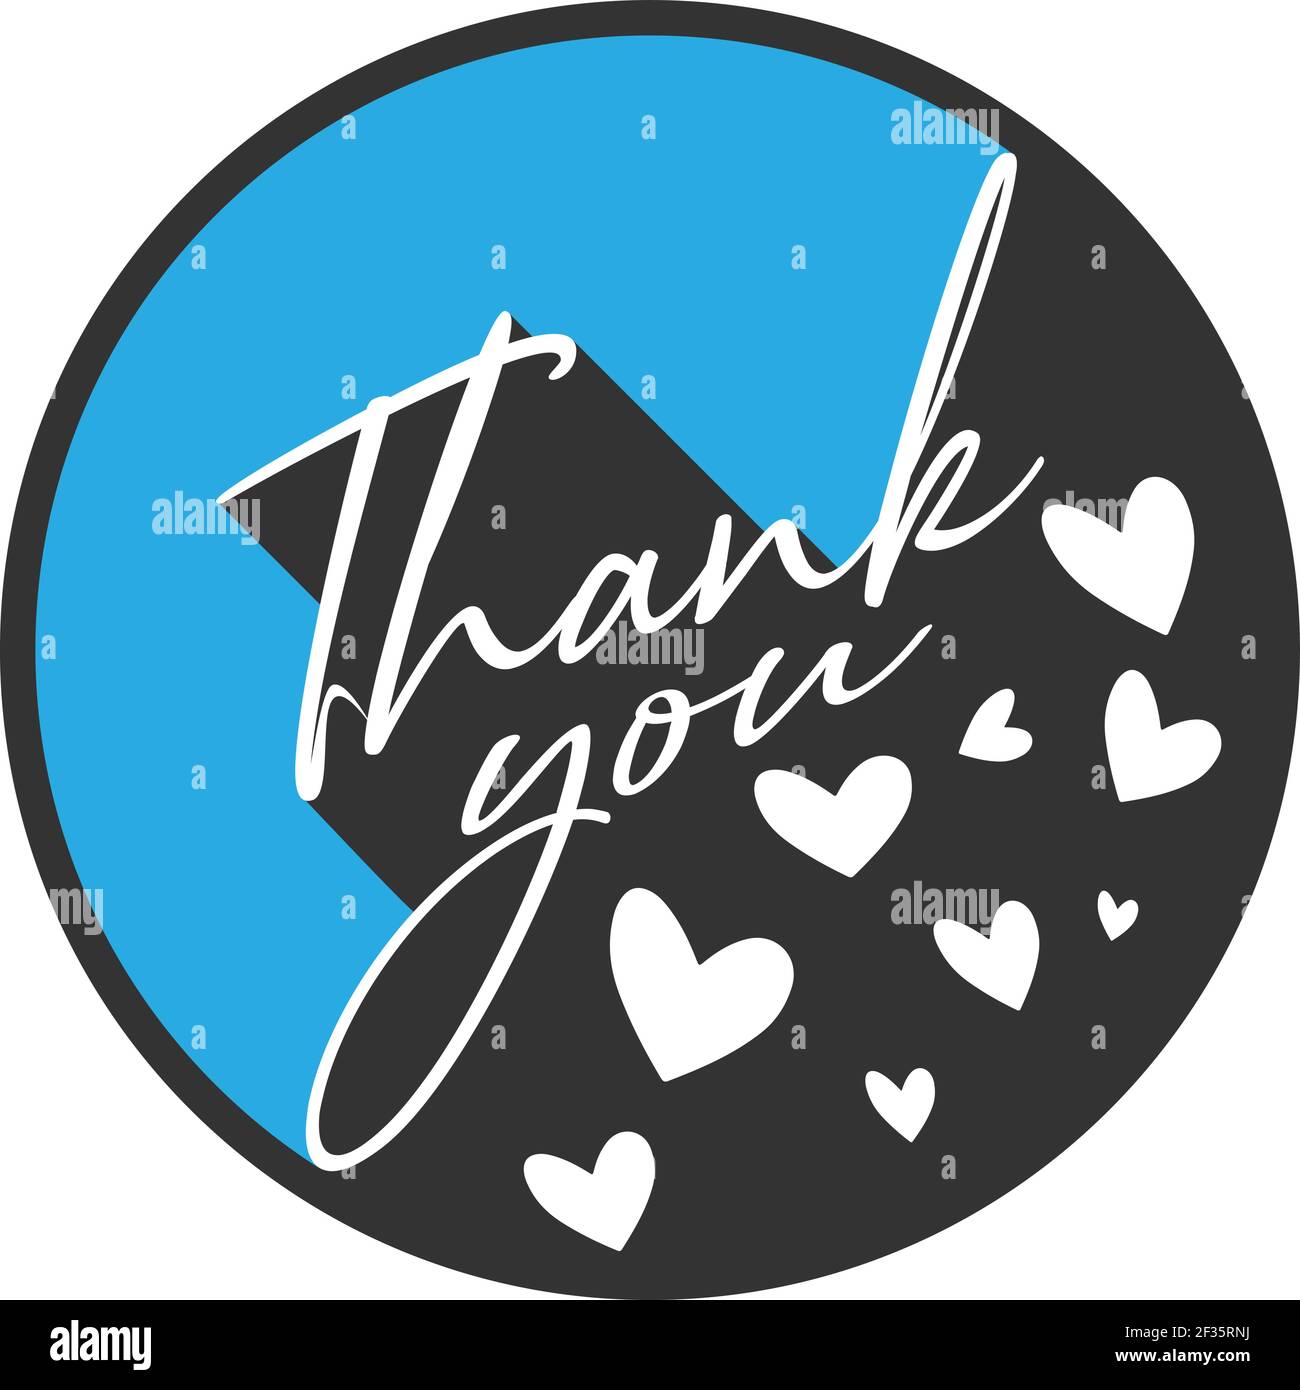 round THANK YOU sticker or label with hearts isolated on white background, vector illustration Stock Vector